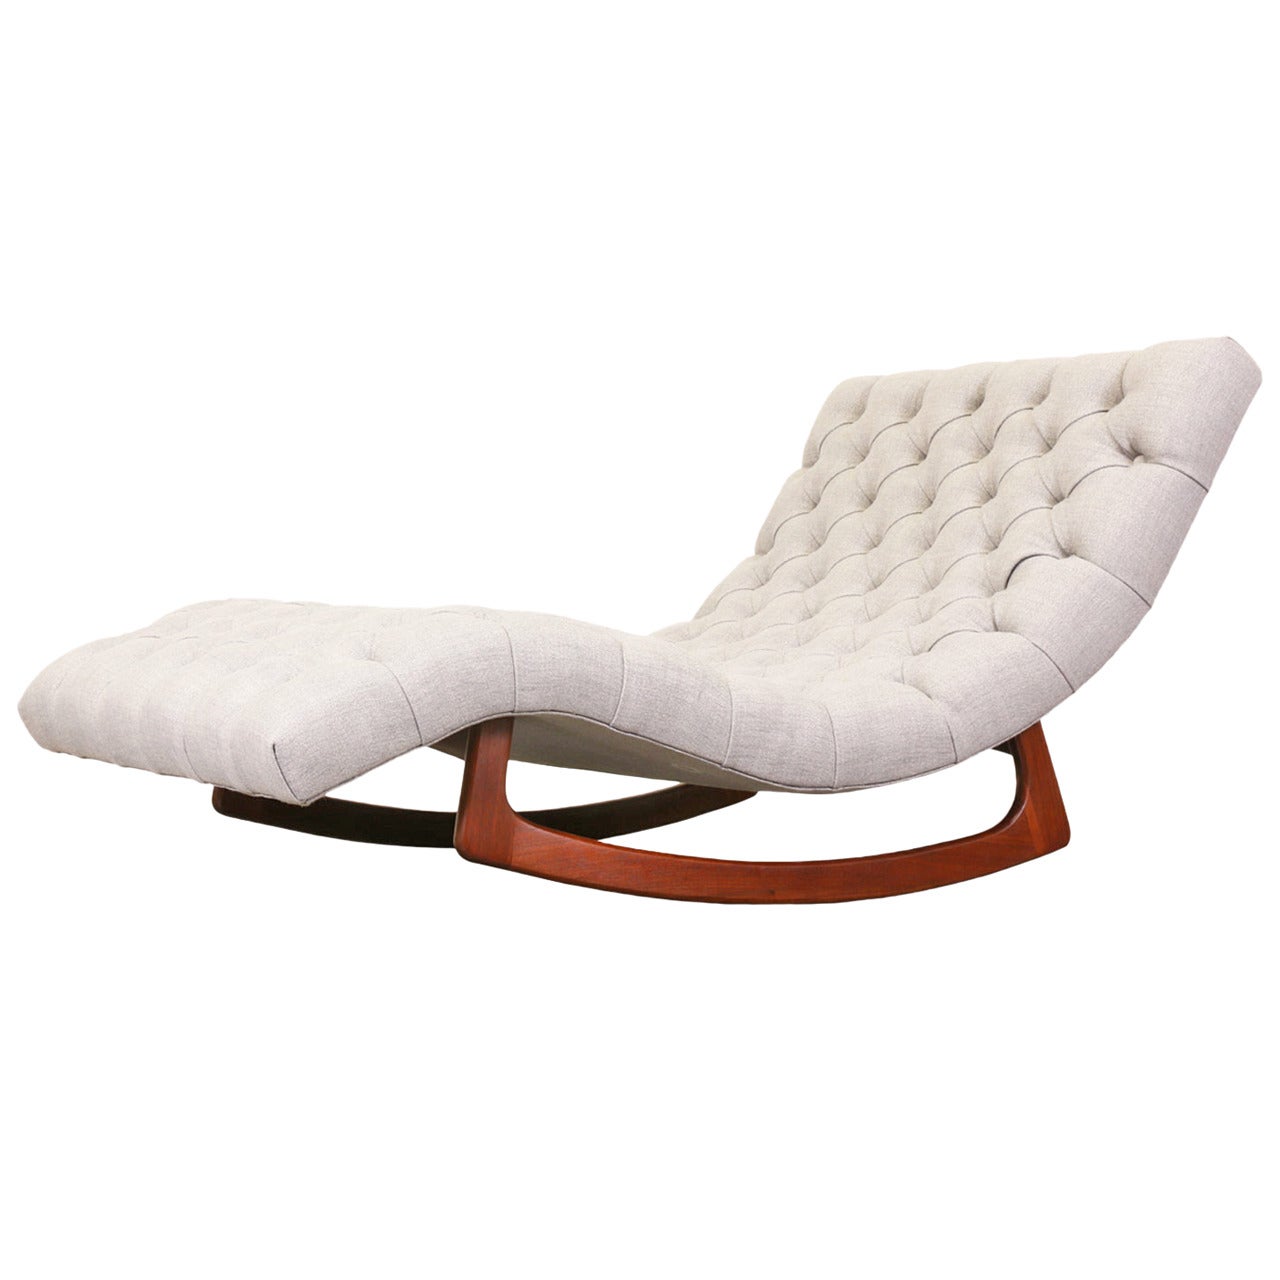 Adrian Pearsall Chaise Lounge for Craft Associates